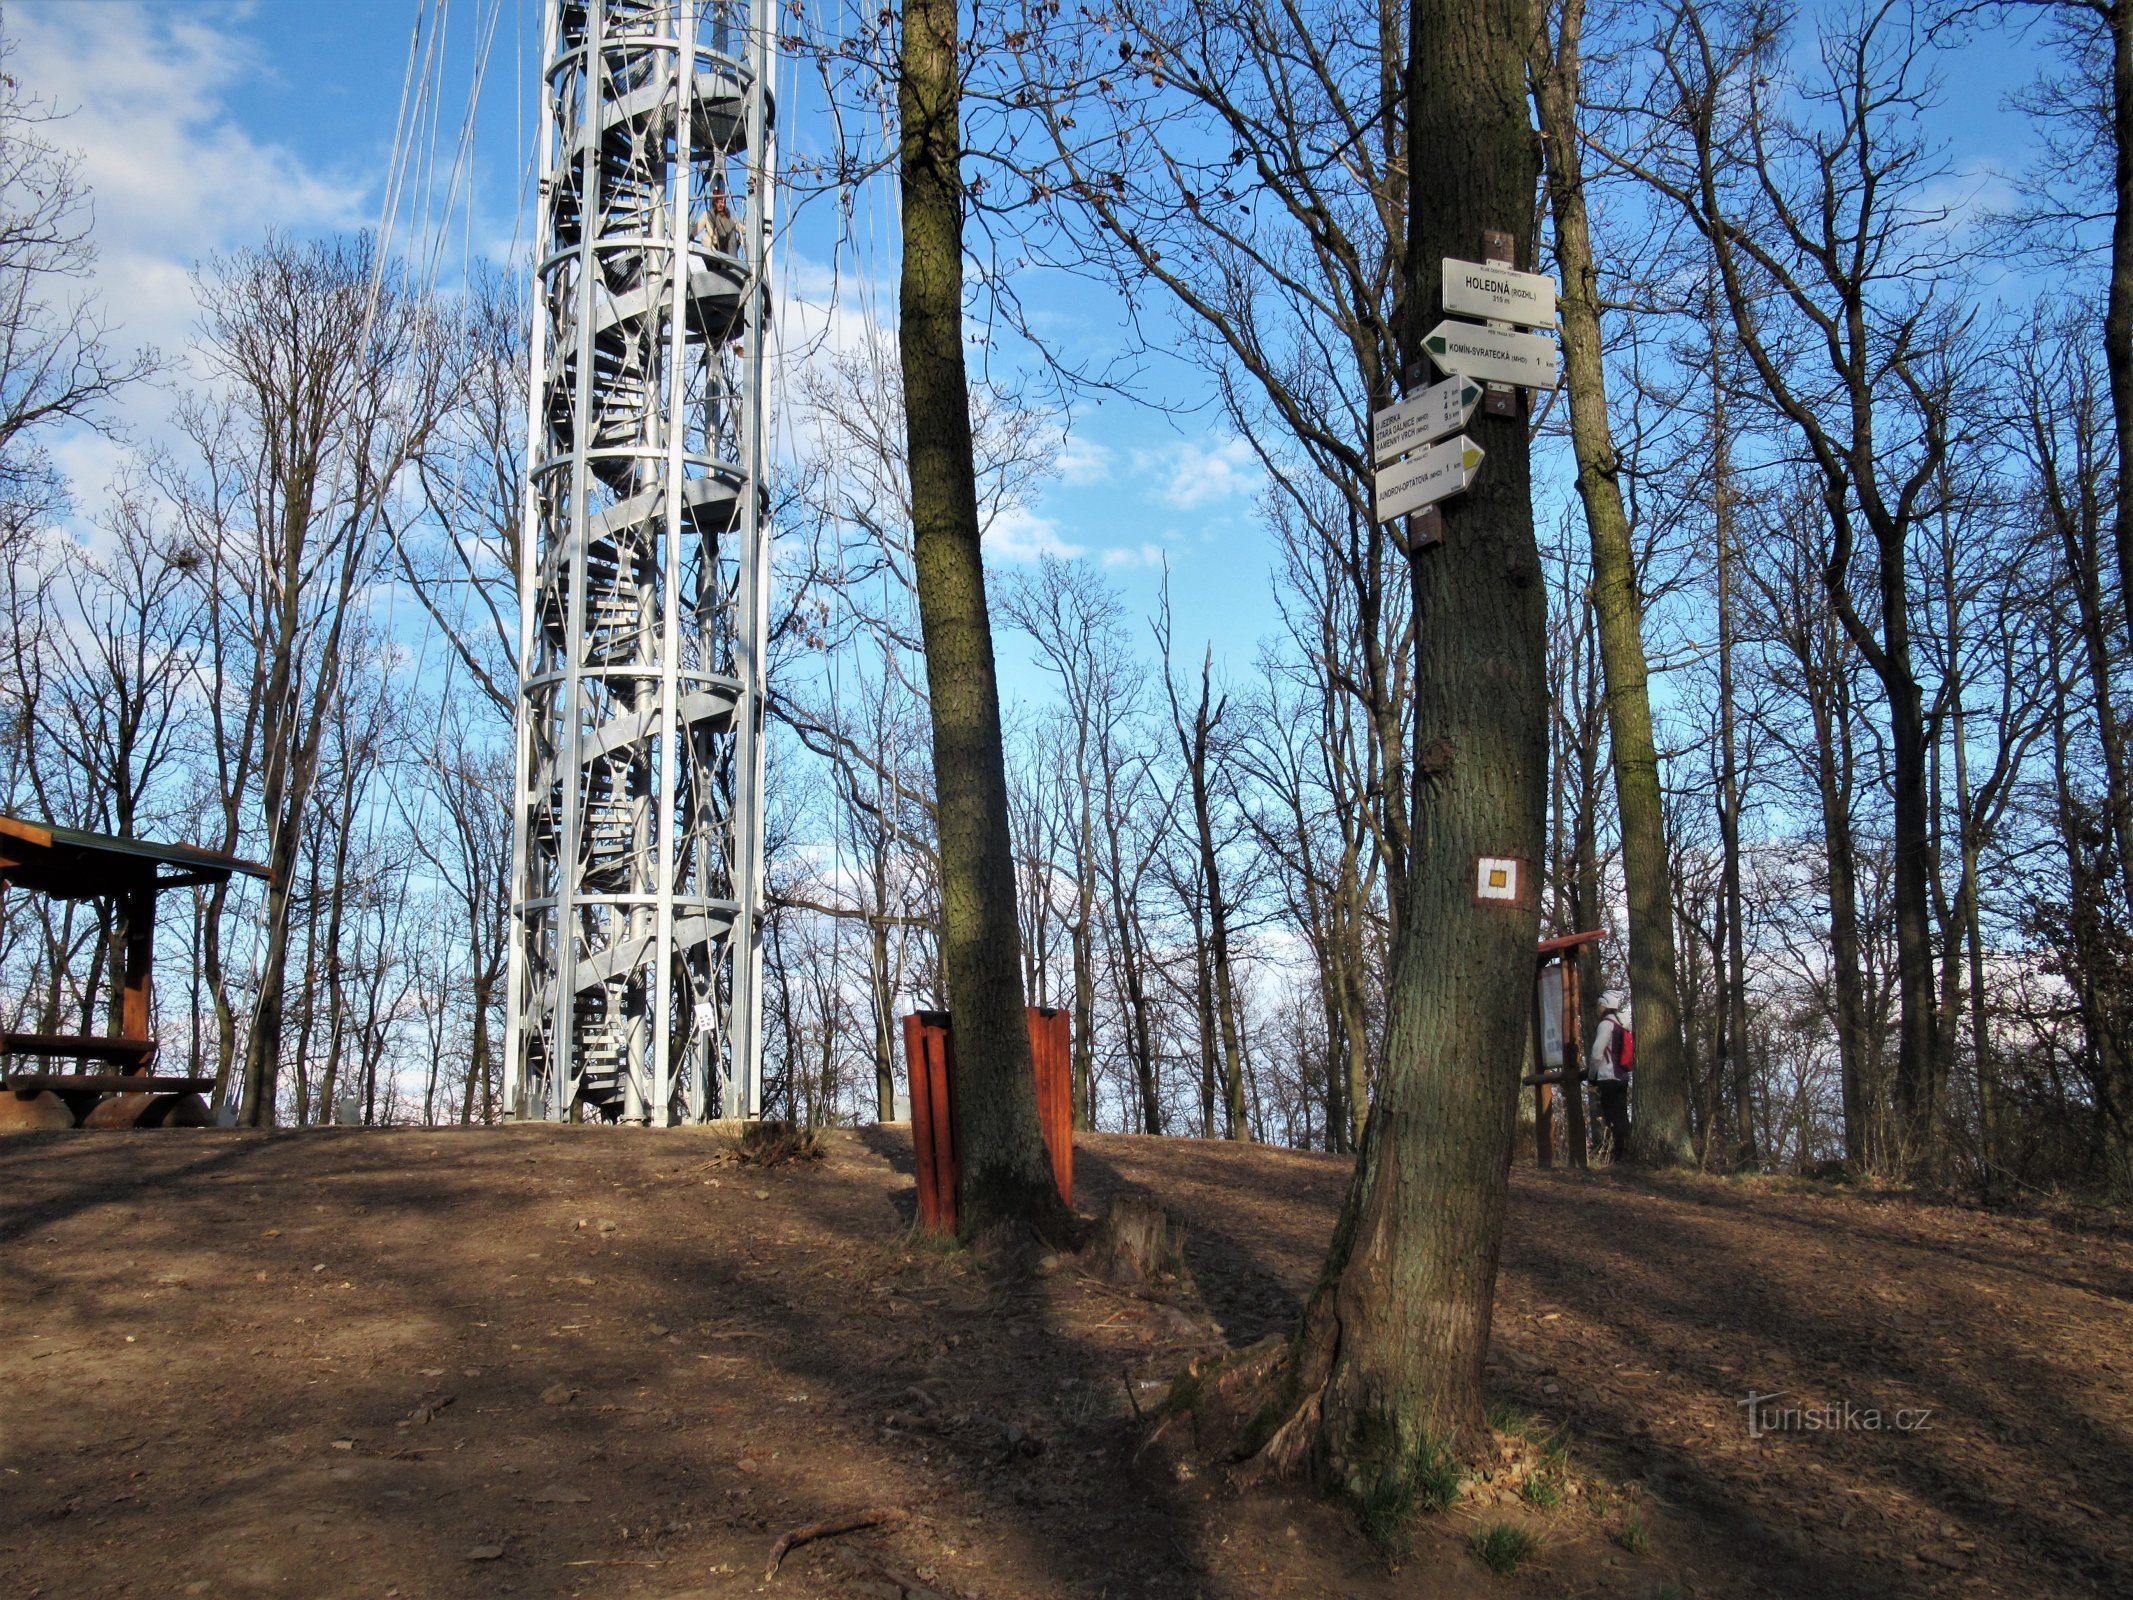 Tourist crossroads with lookout tower